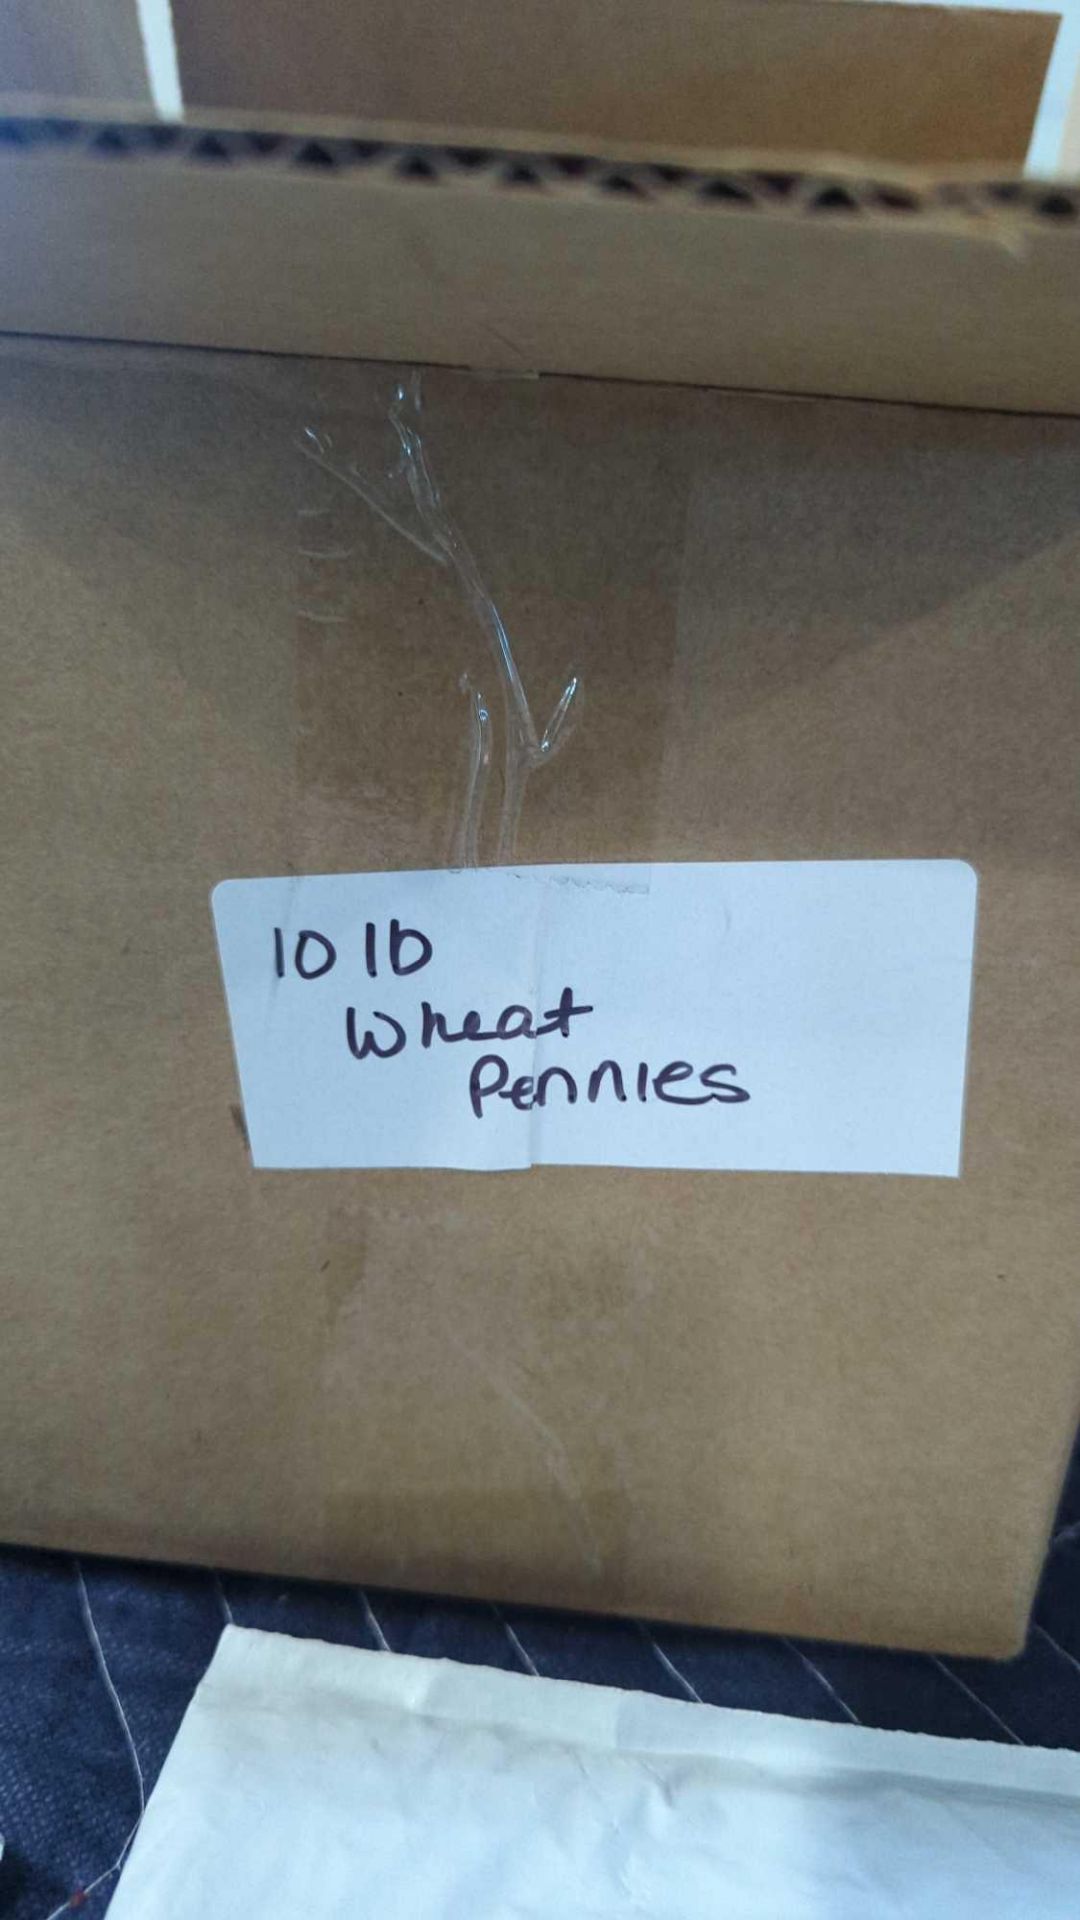 box of 10lbs what pennies - Image 3 of 3